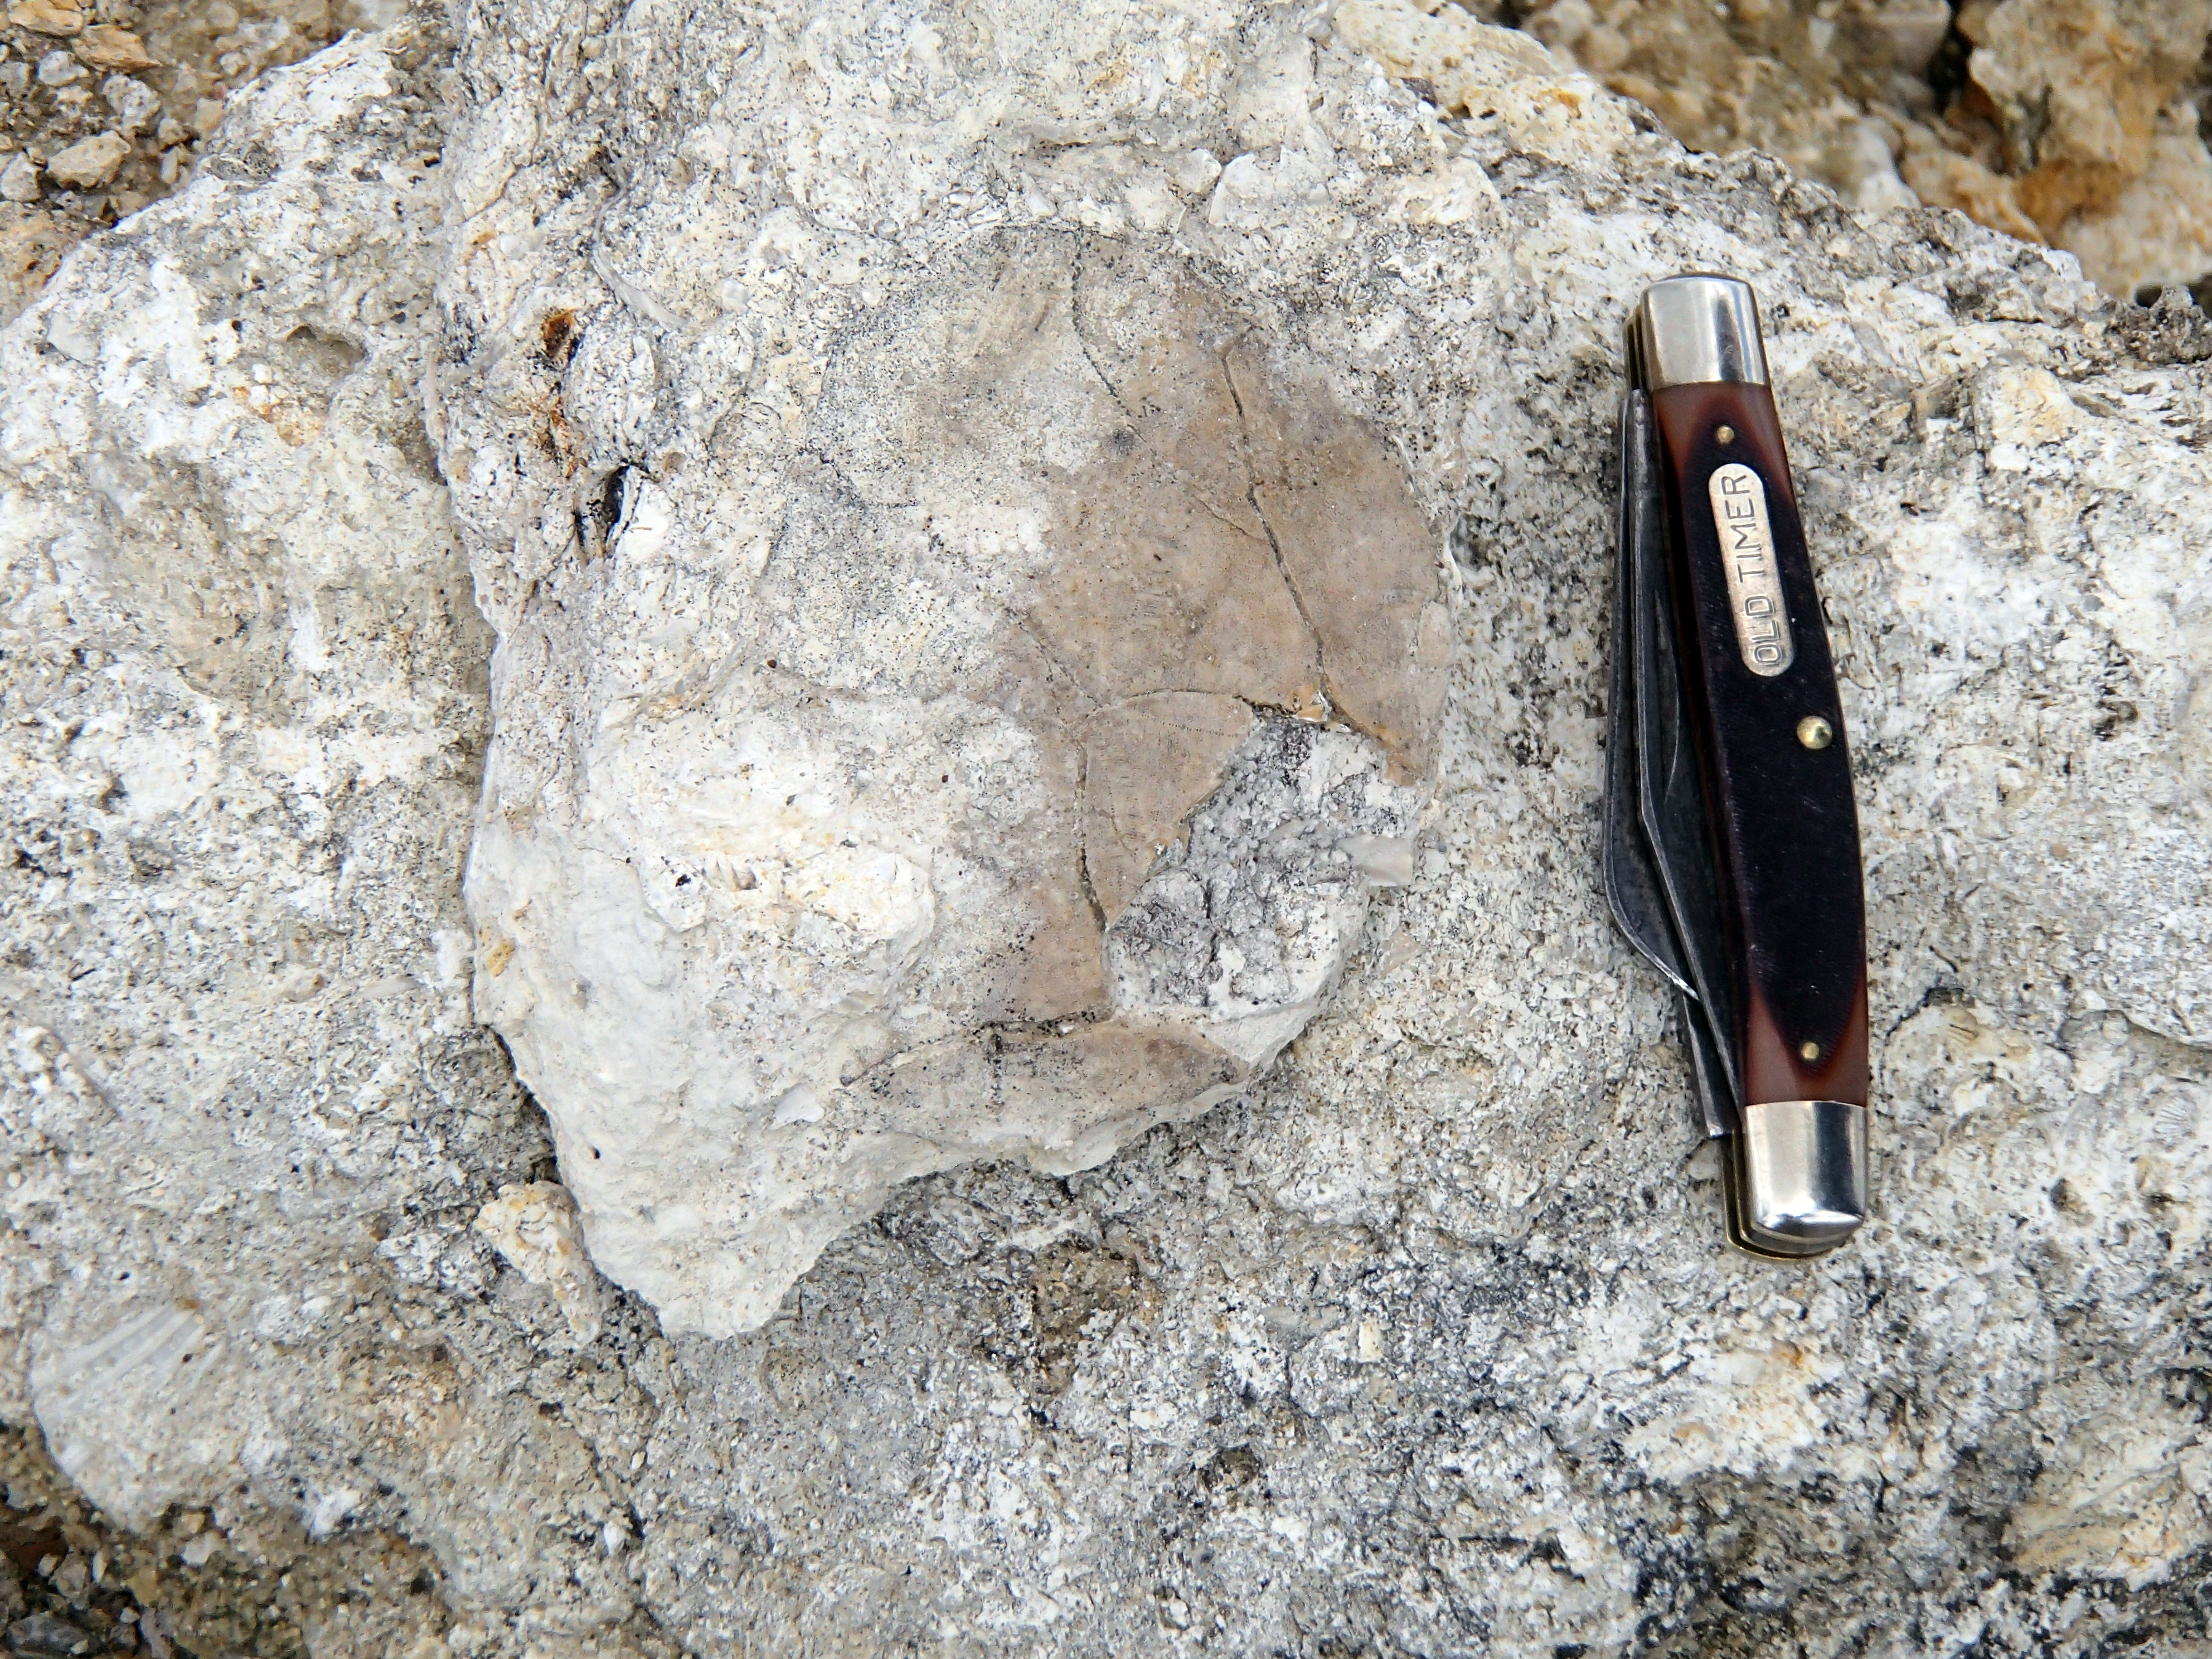 Fossil oyster from the early Miocene Torreya Formation at Rock Bluff